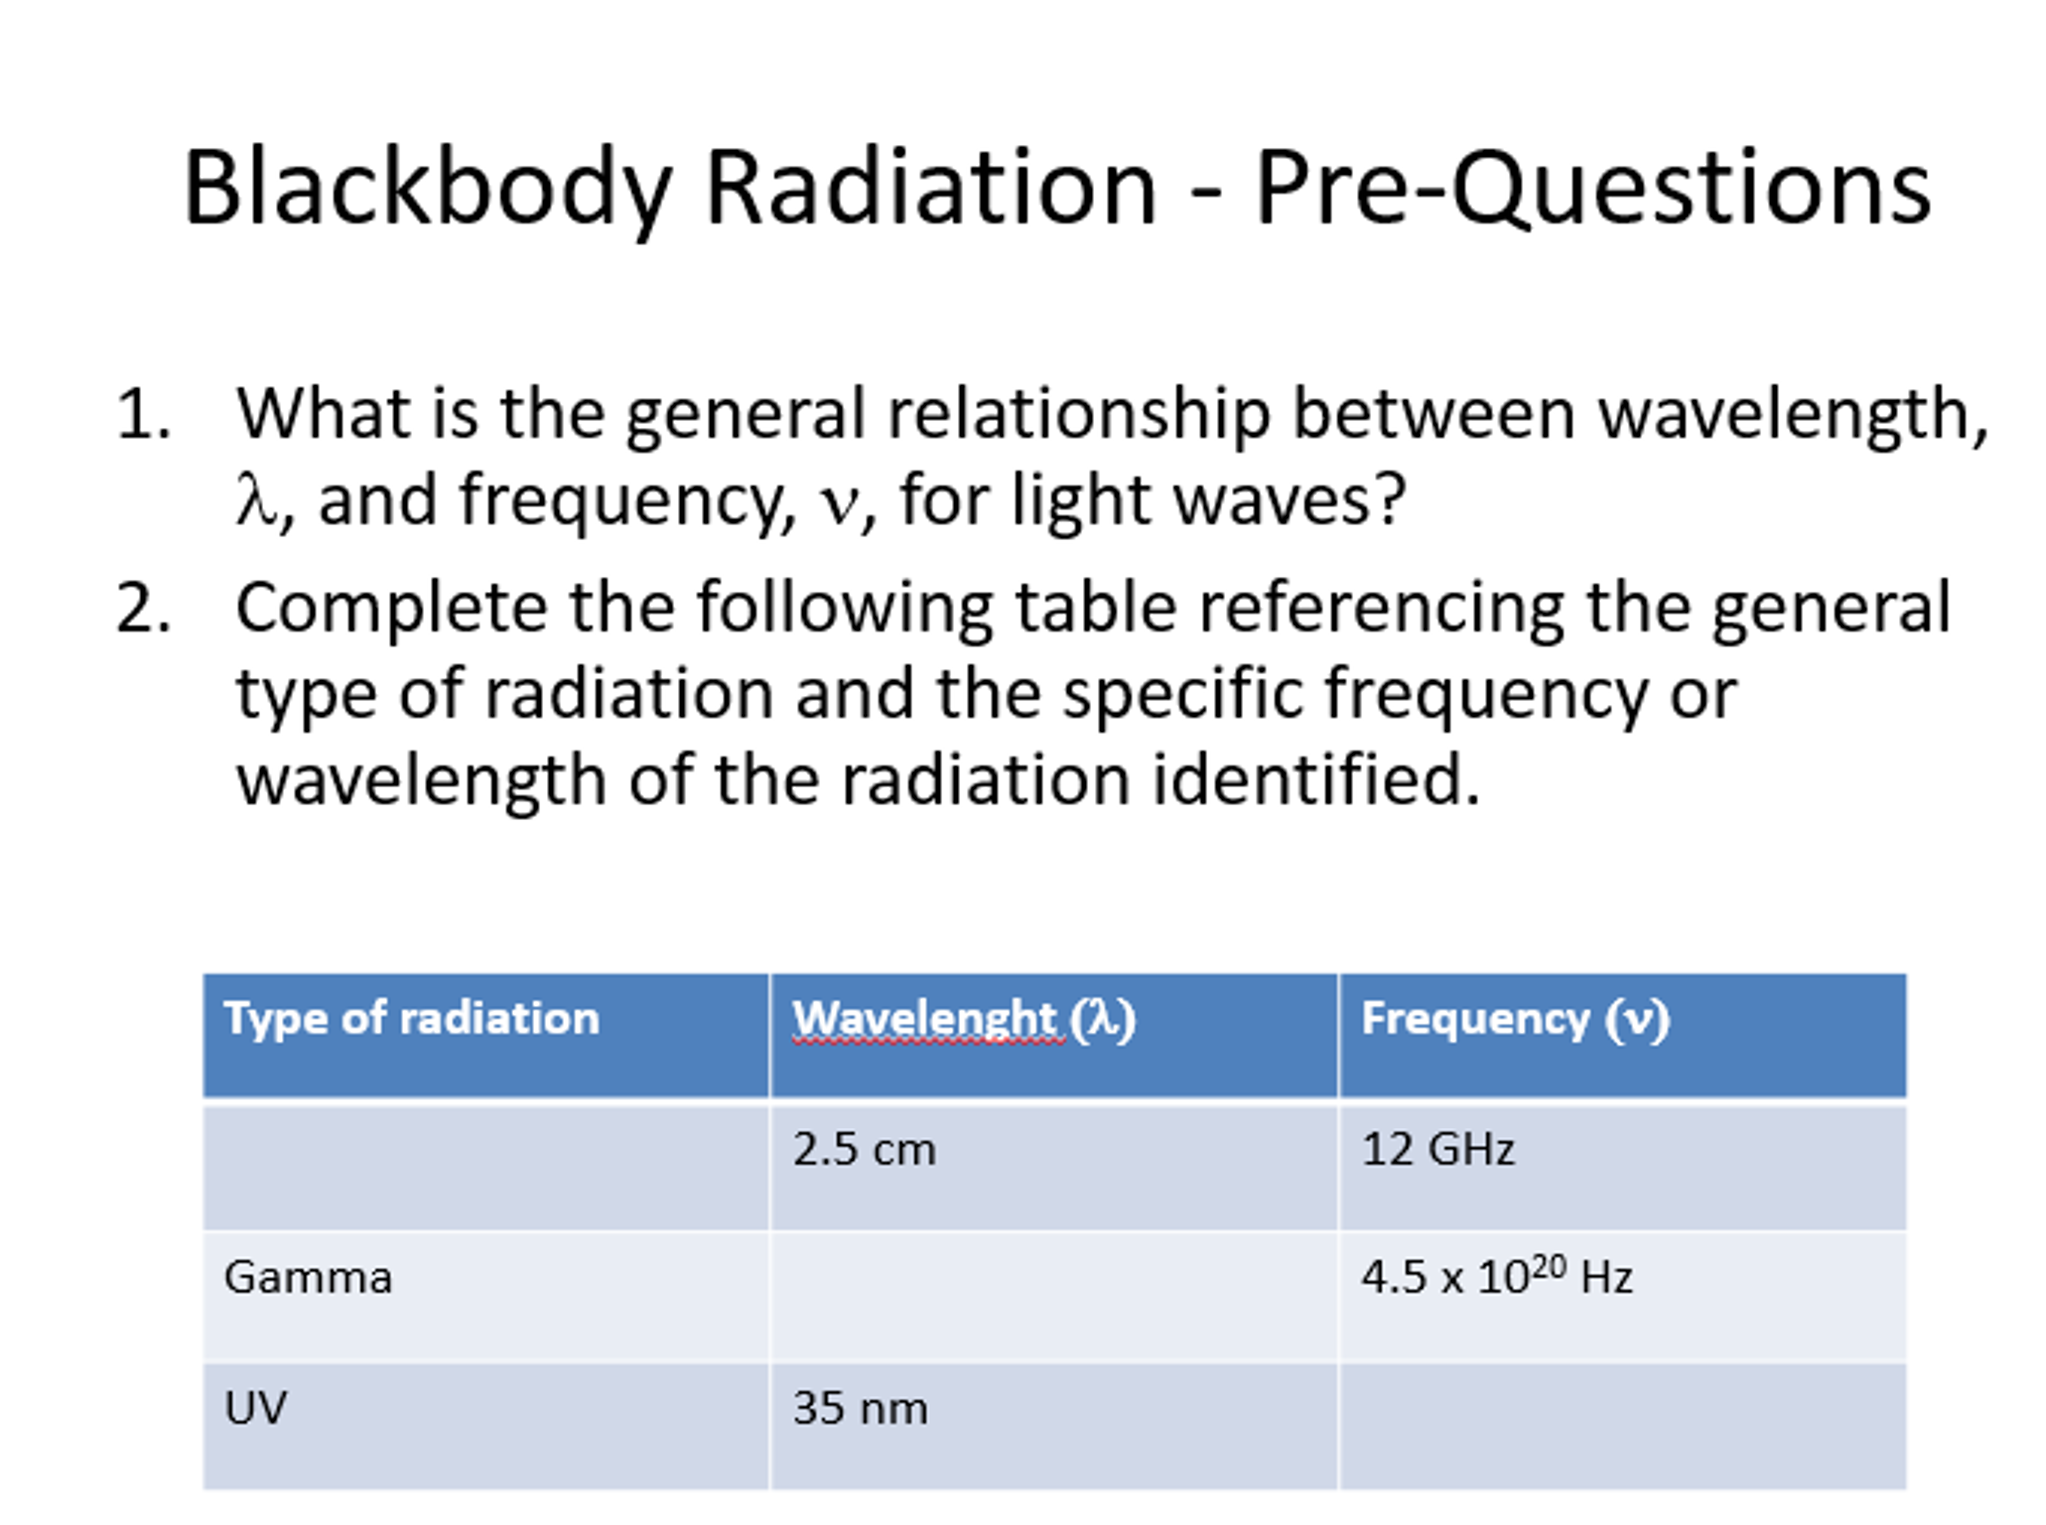 describe mathematical relationship between frequency and wavelength